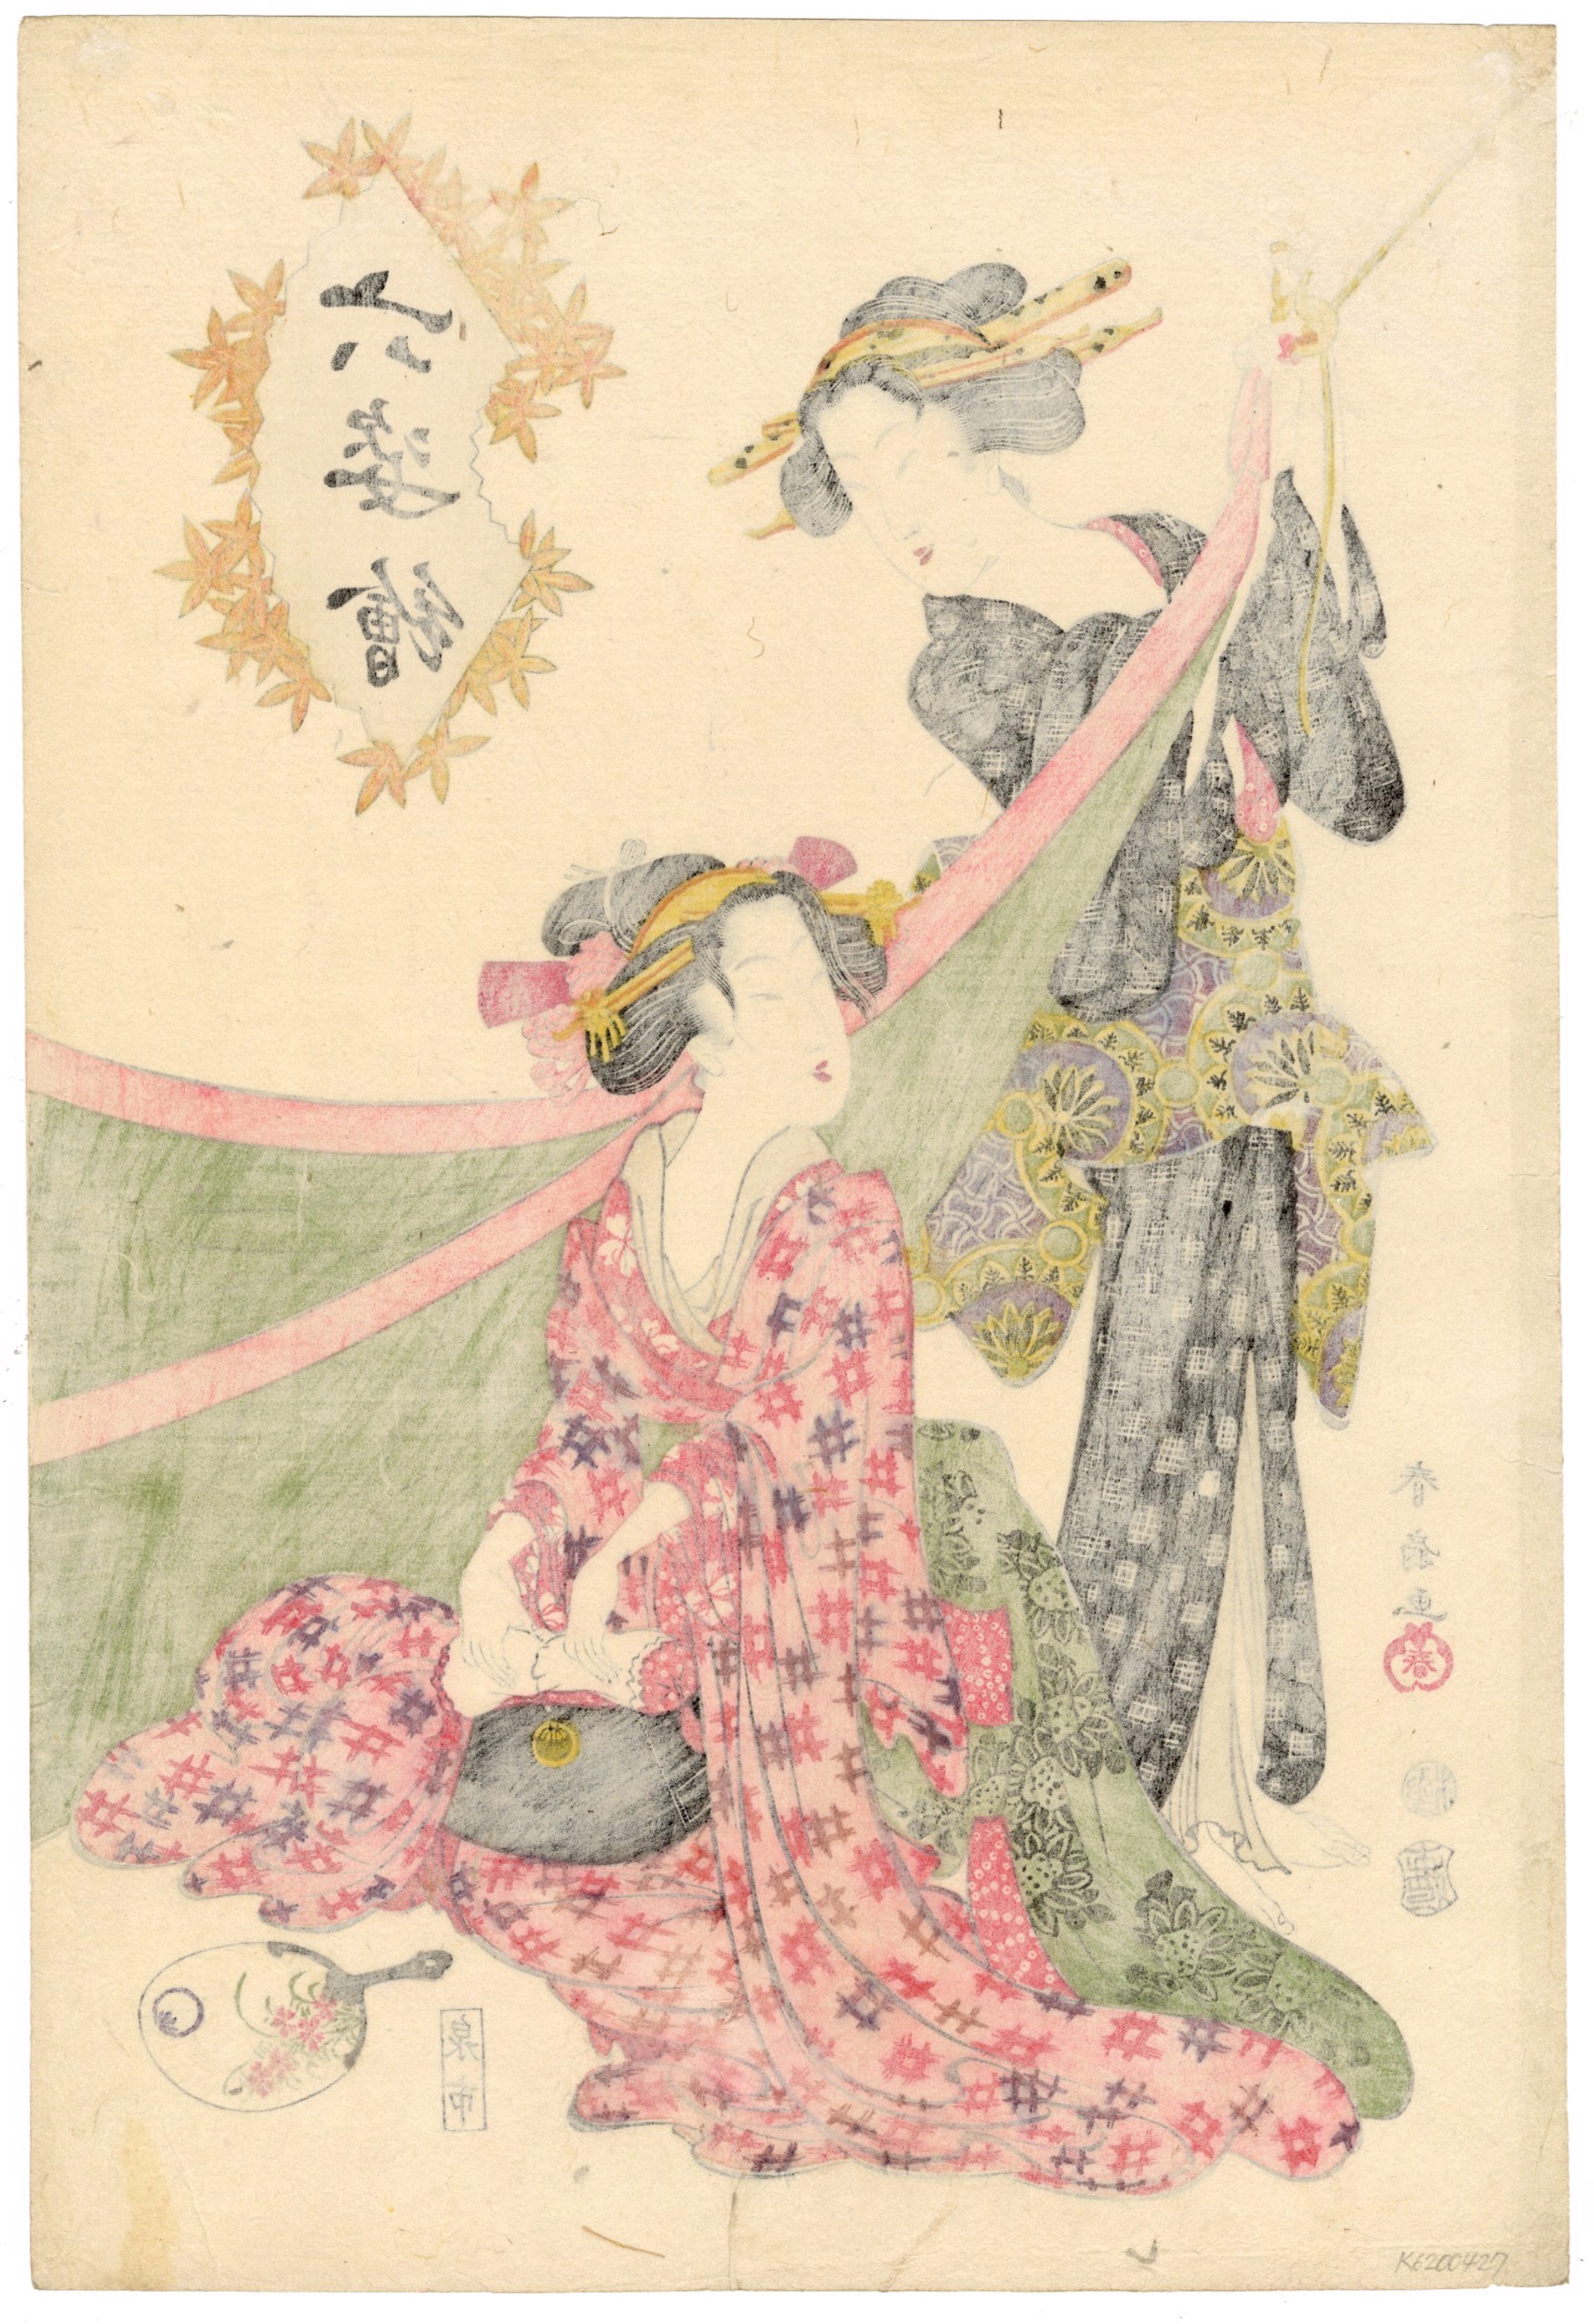 Two Courtesans Adjusting their Mosquito Net as they Prepare for Bed. by Shunko II (Katsukawa Shunsen)